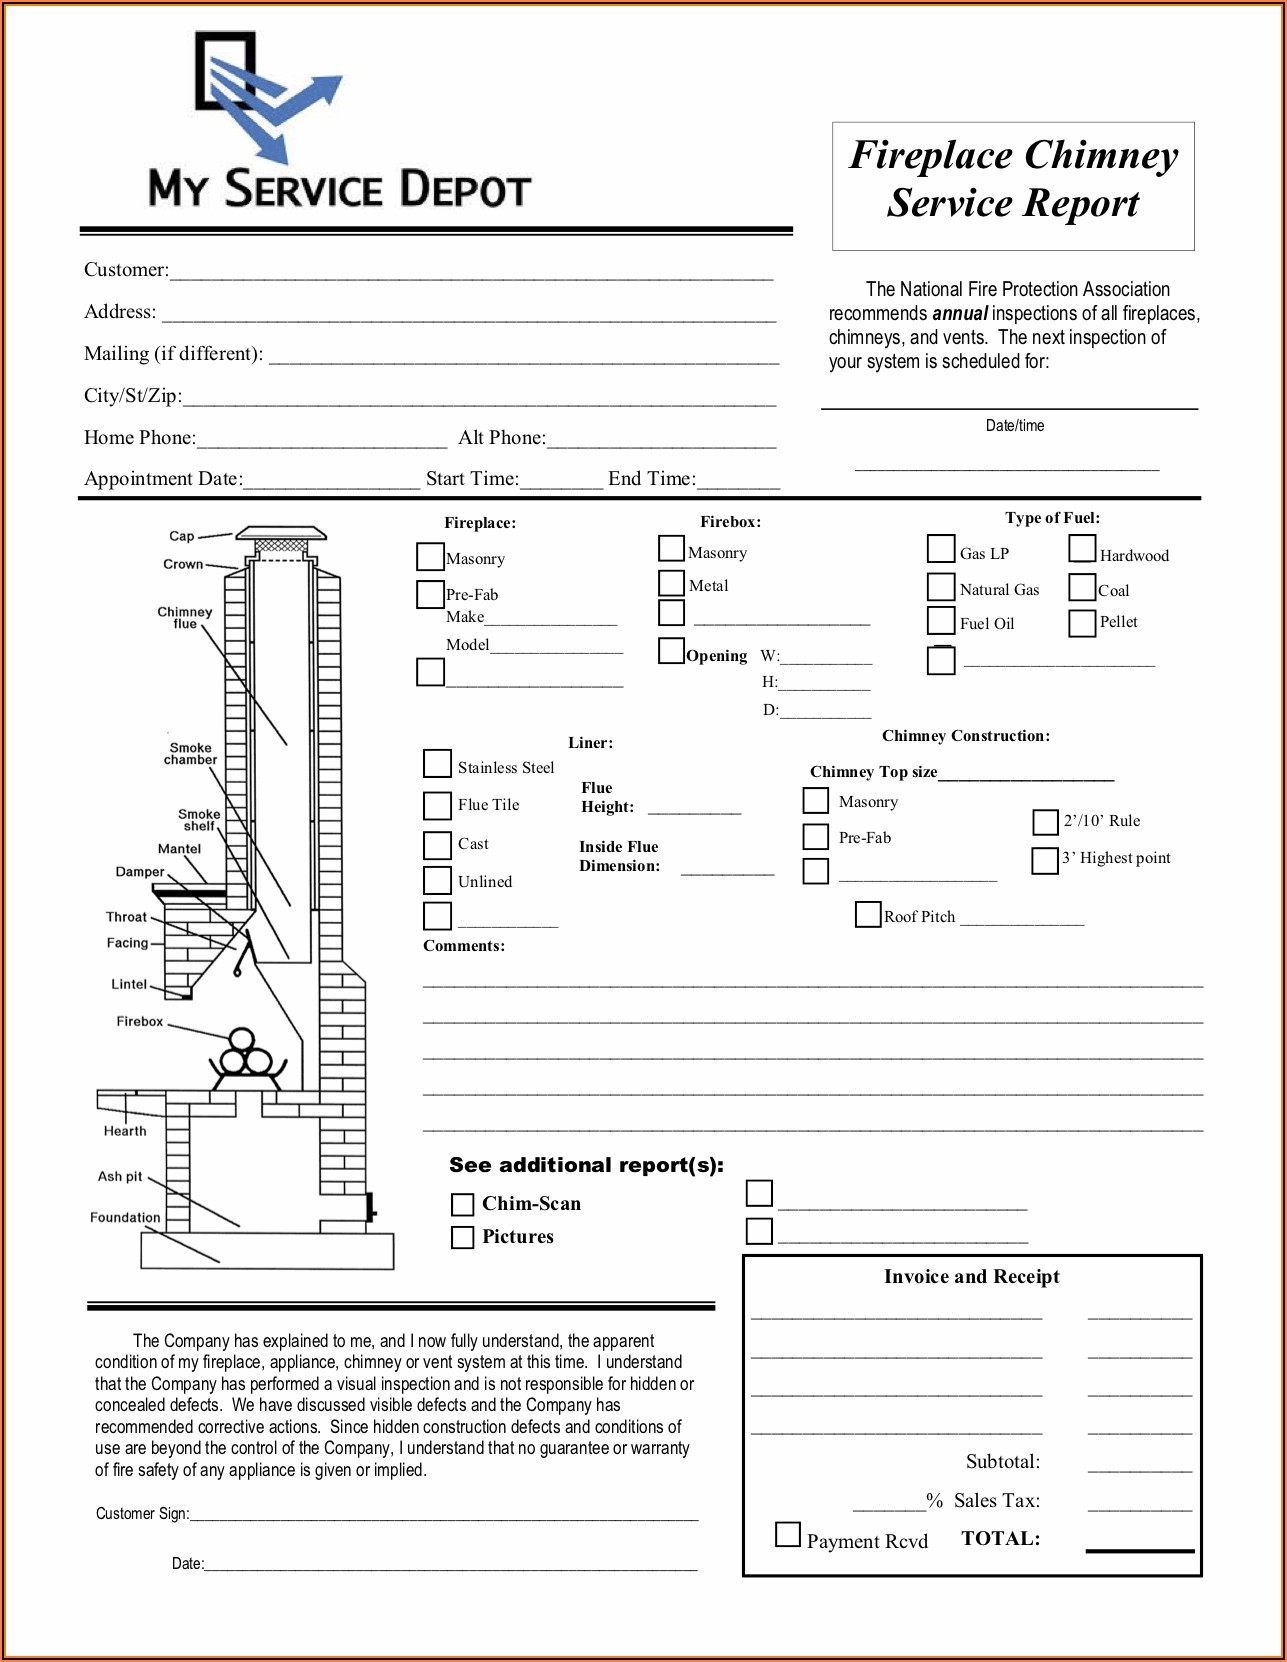 Chimney Inspection Report Form